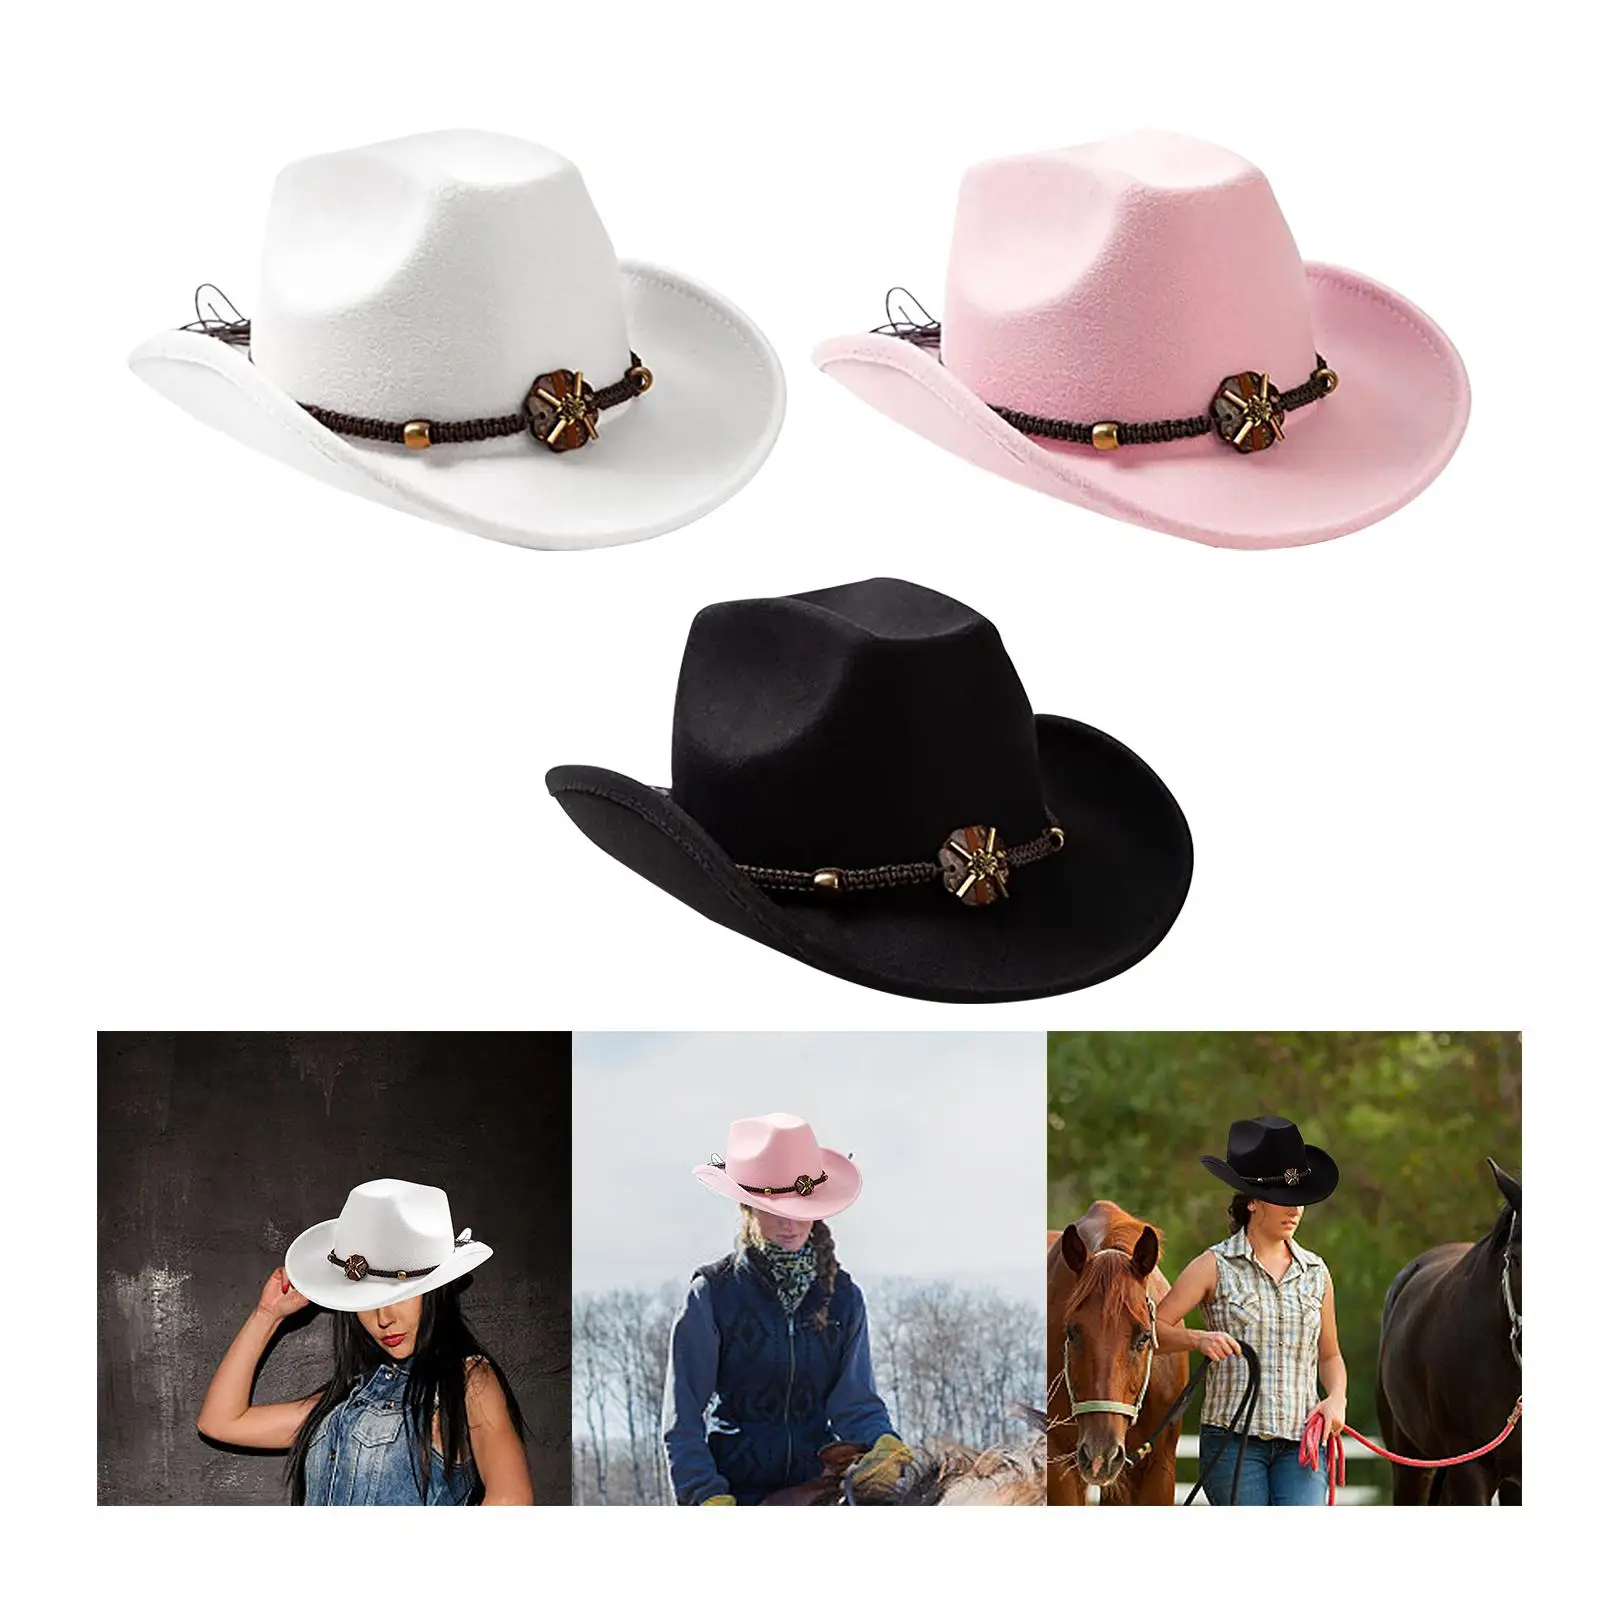 Classic Cowboy Cowgirl Hat Props Big Brim Fancy Dress Costume Cosplay Sun Hats Sunshade for Adults Beach Play Traveling Outdoor